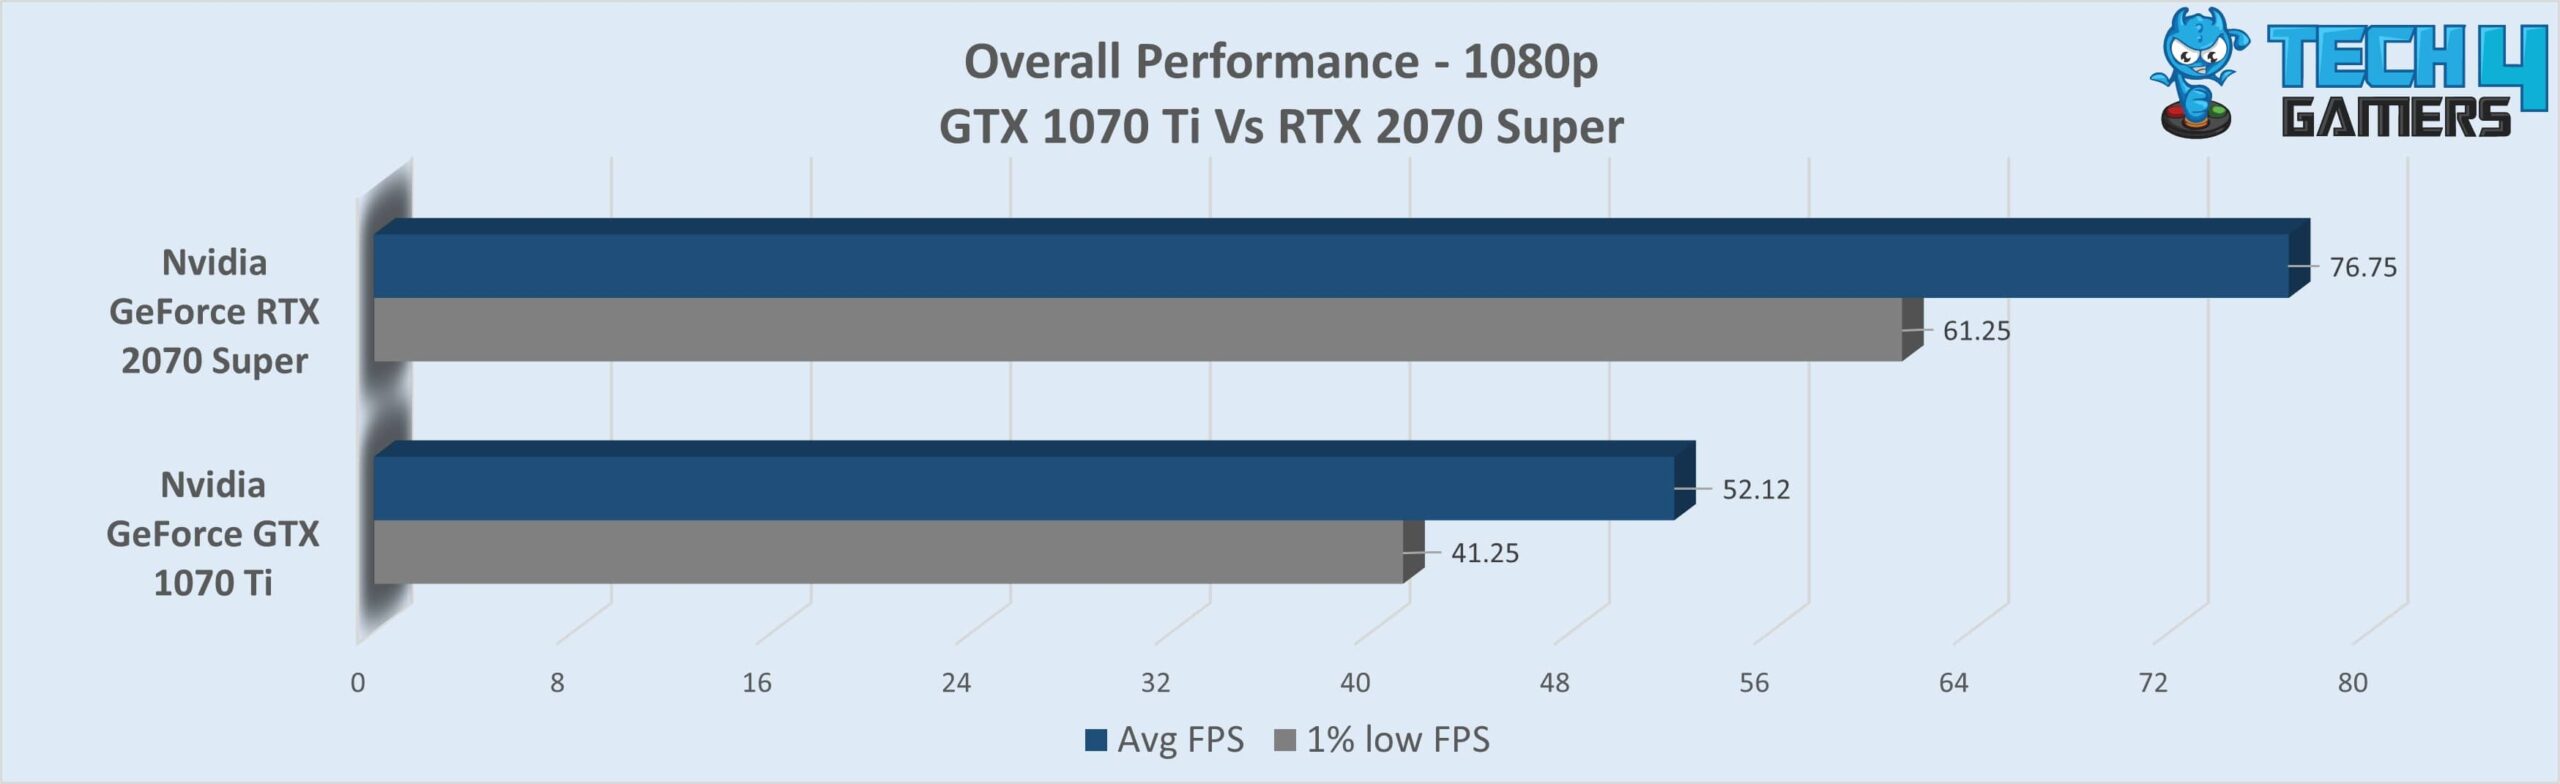 Overall Performance of two GPUs at 1080p